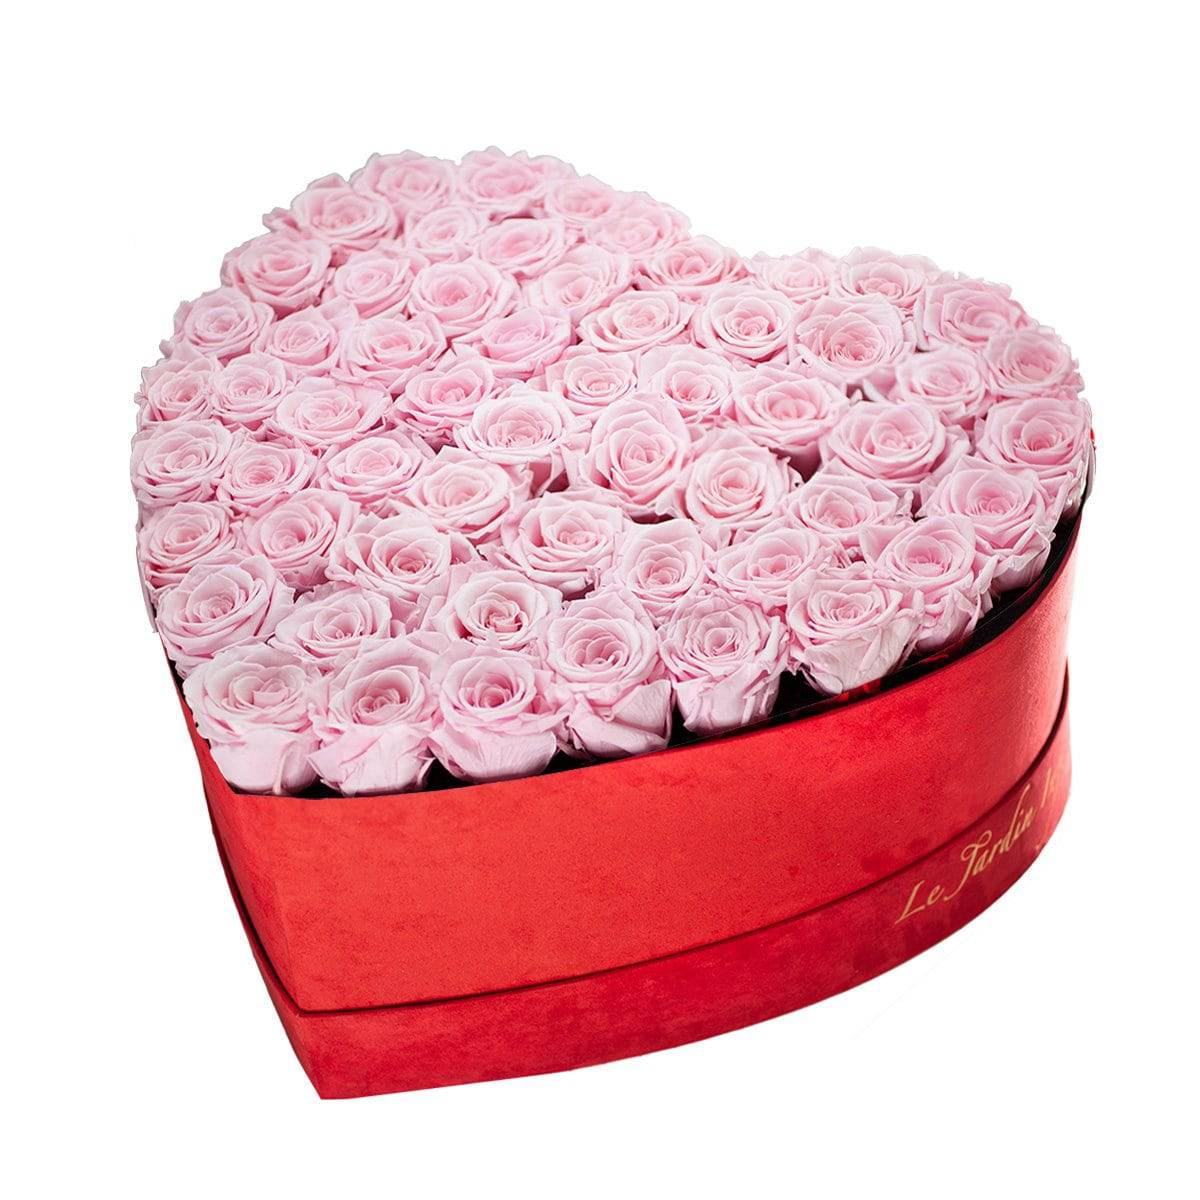 Heart-shaped box with roses and sweets